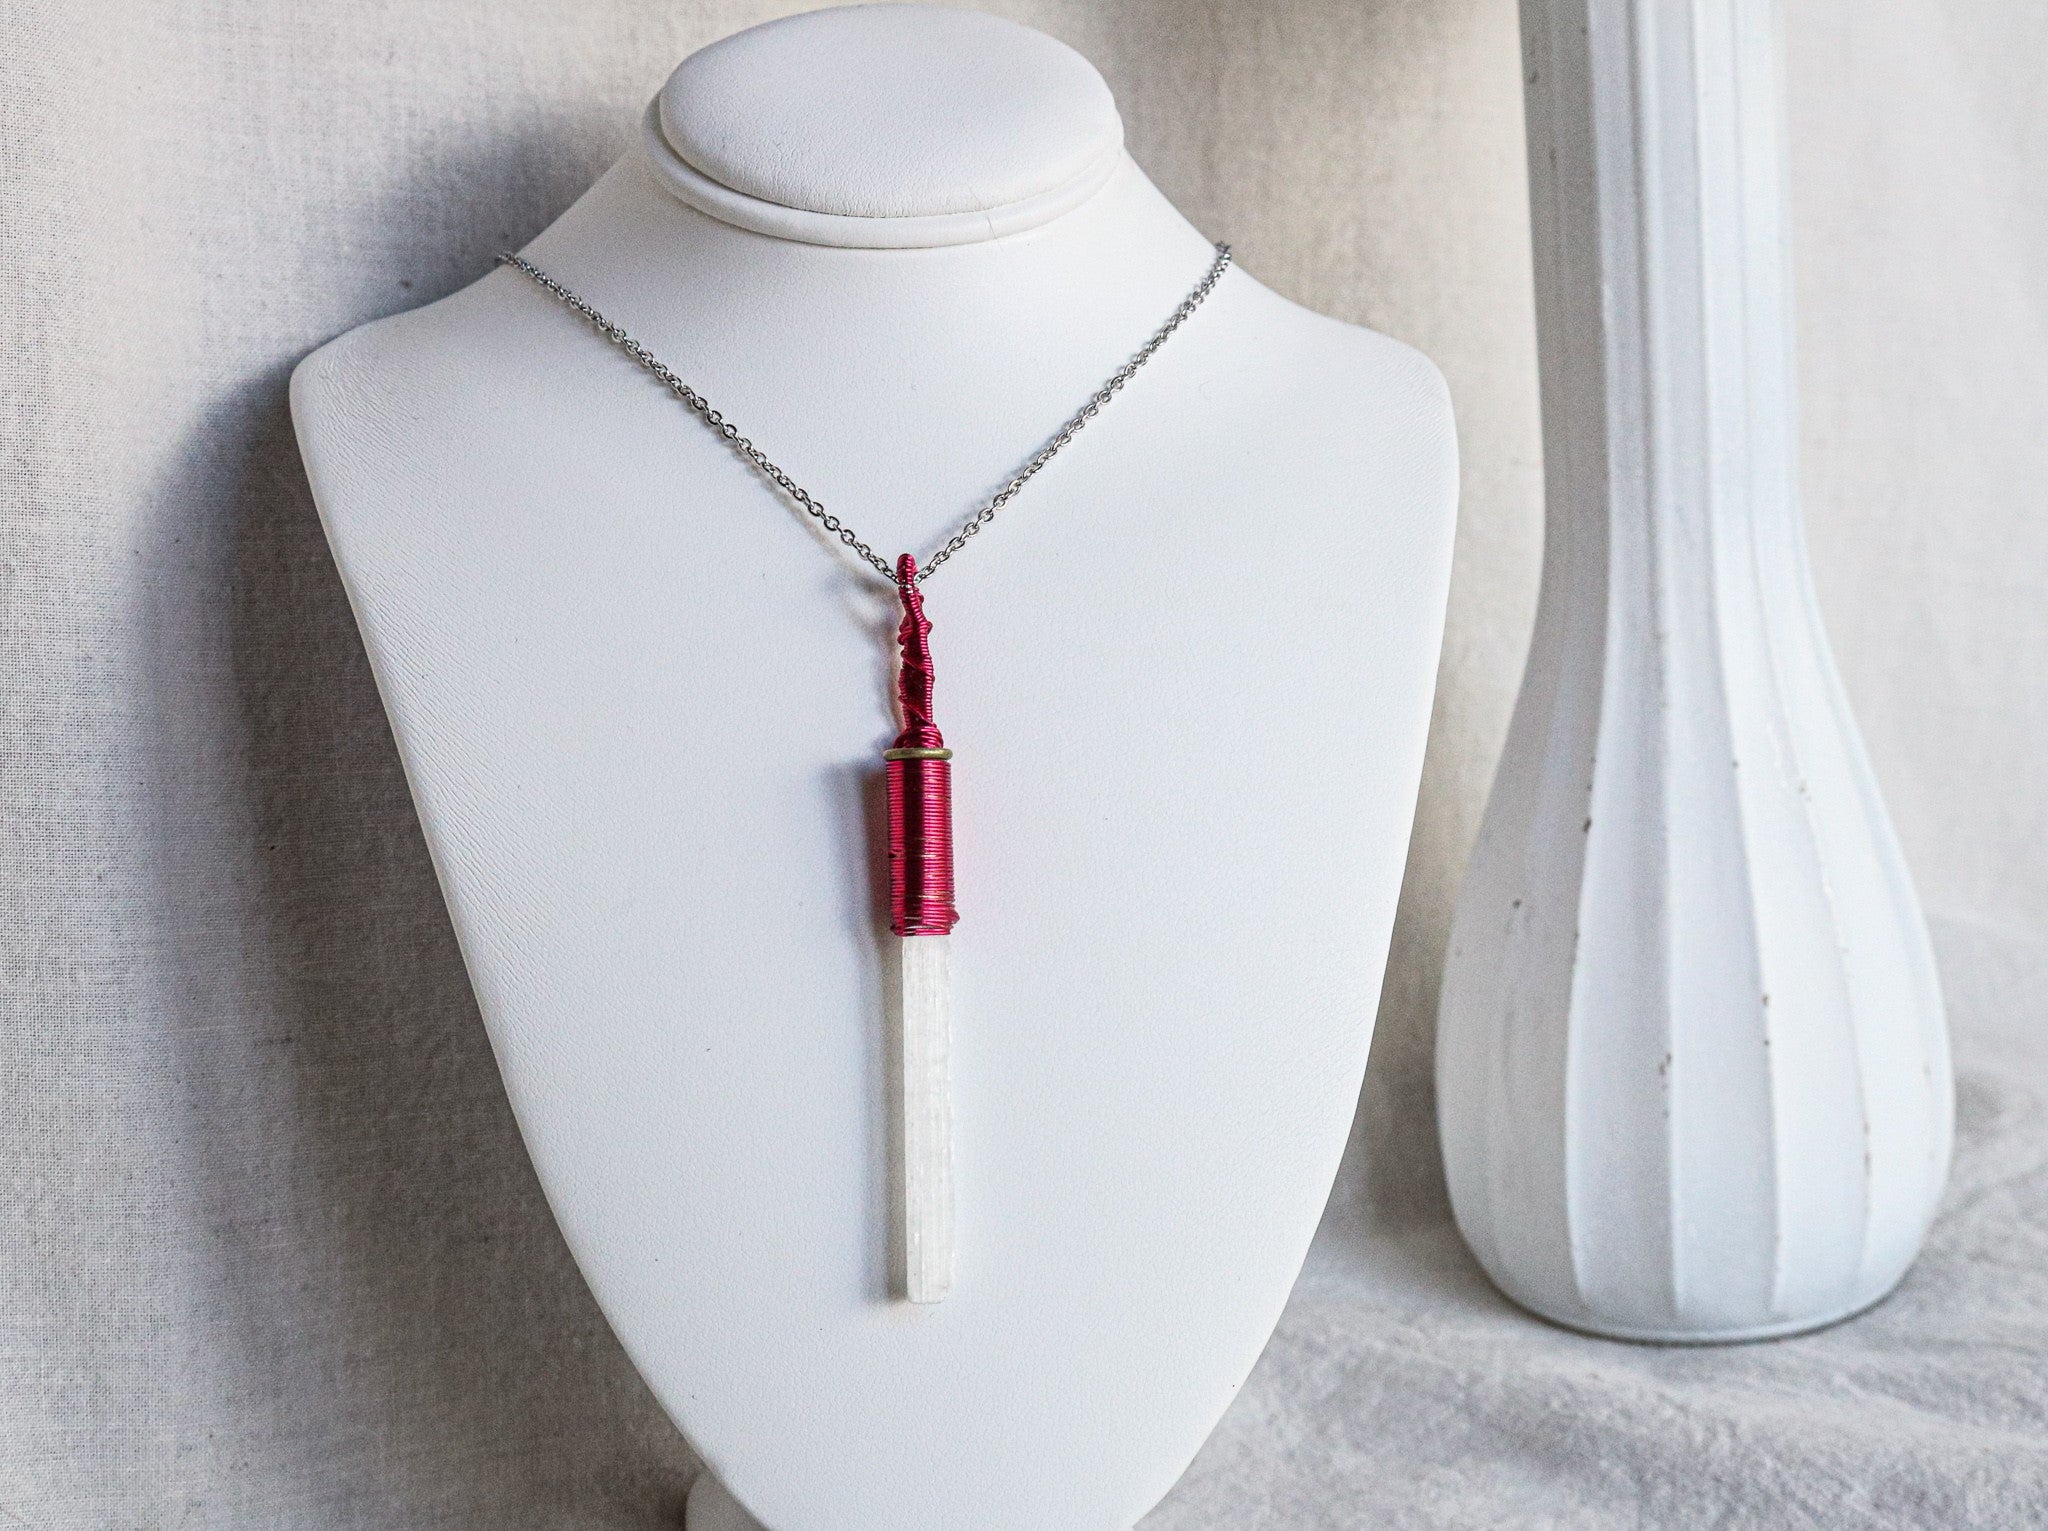 Buy Vial Necklace Online In India - Etsy India